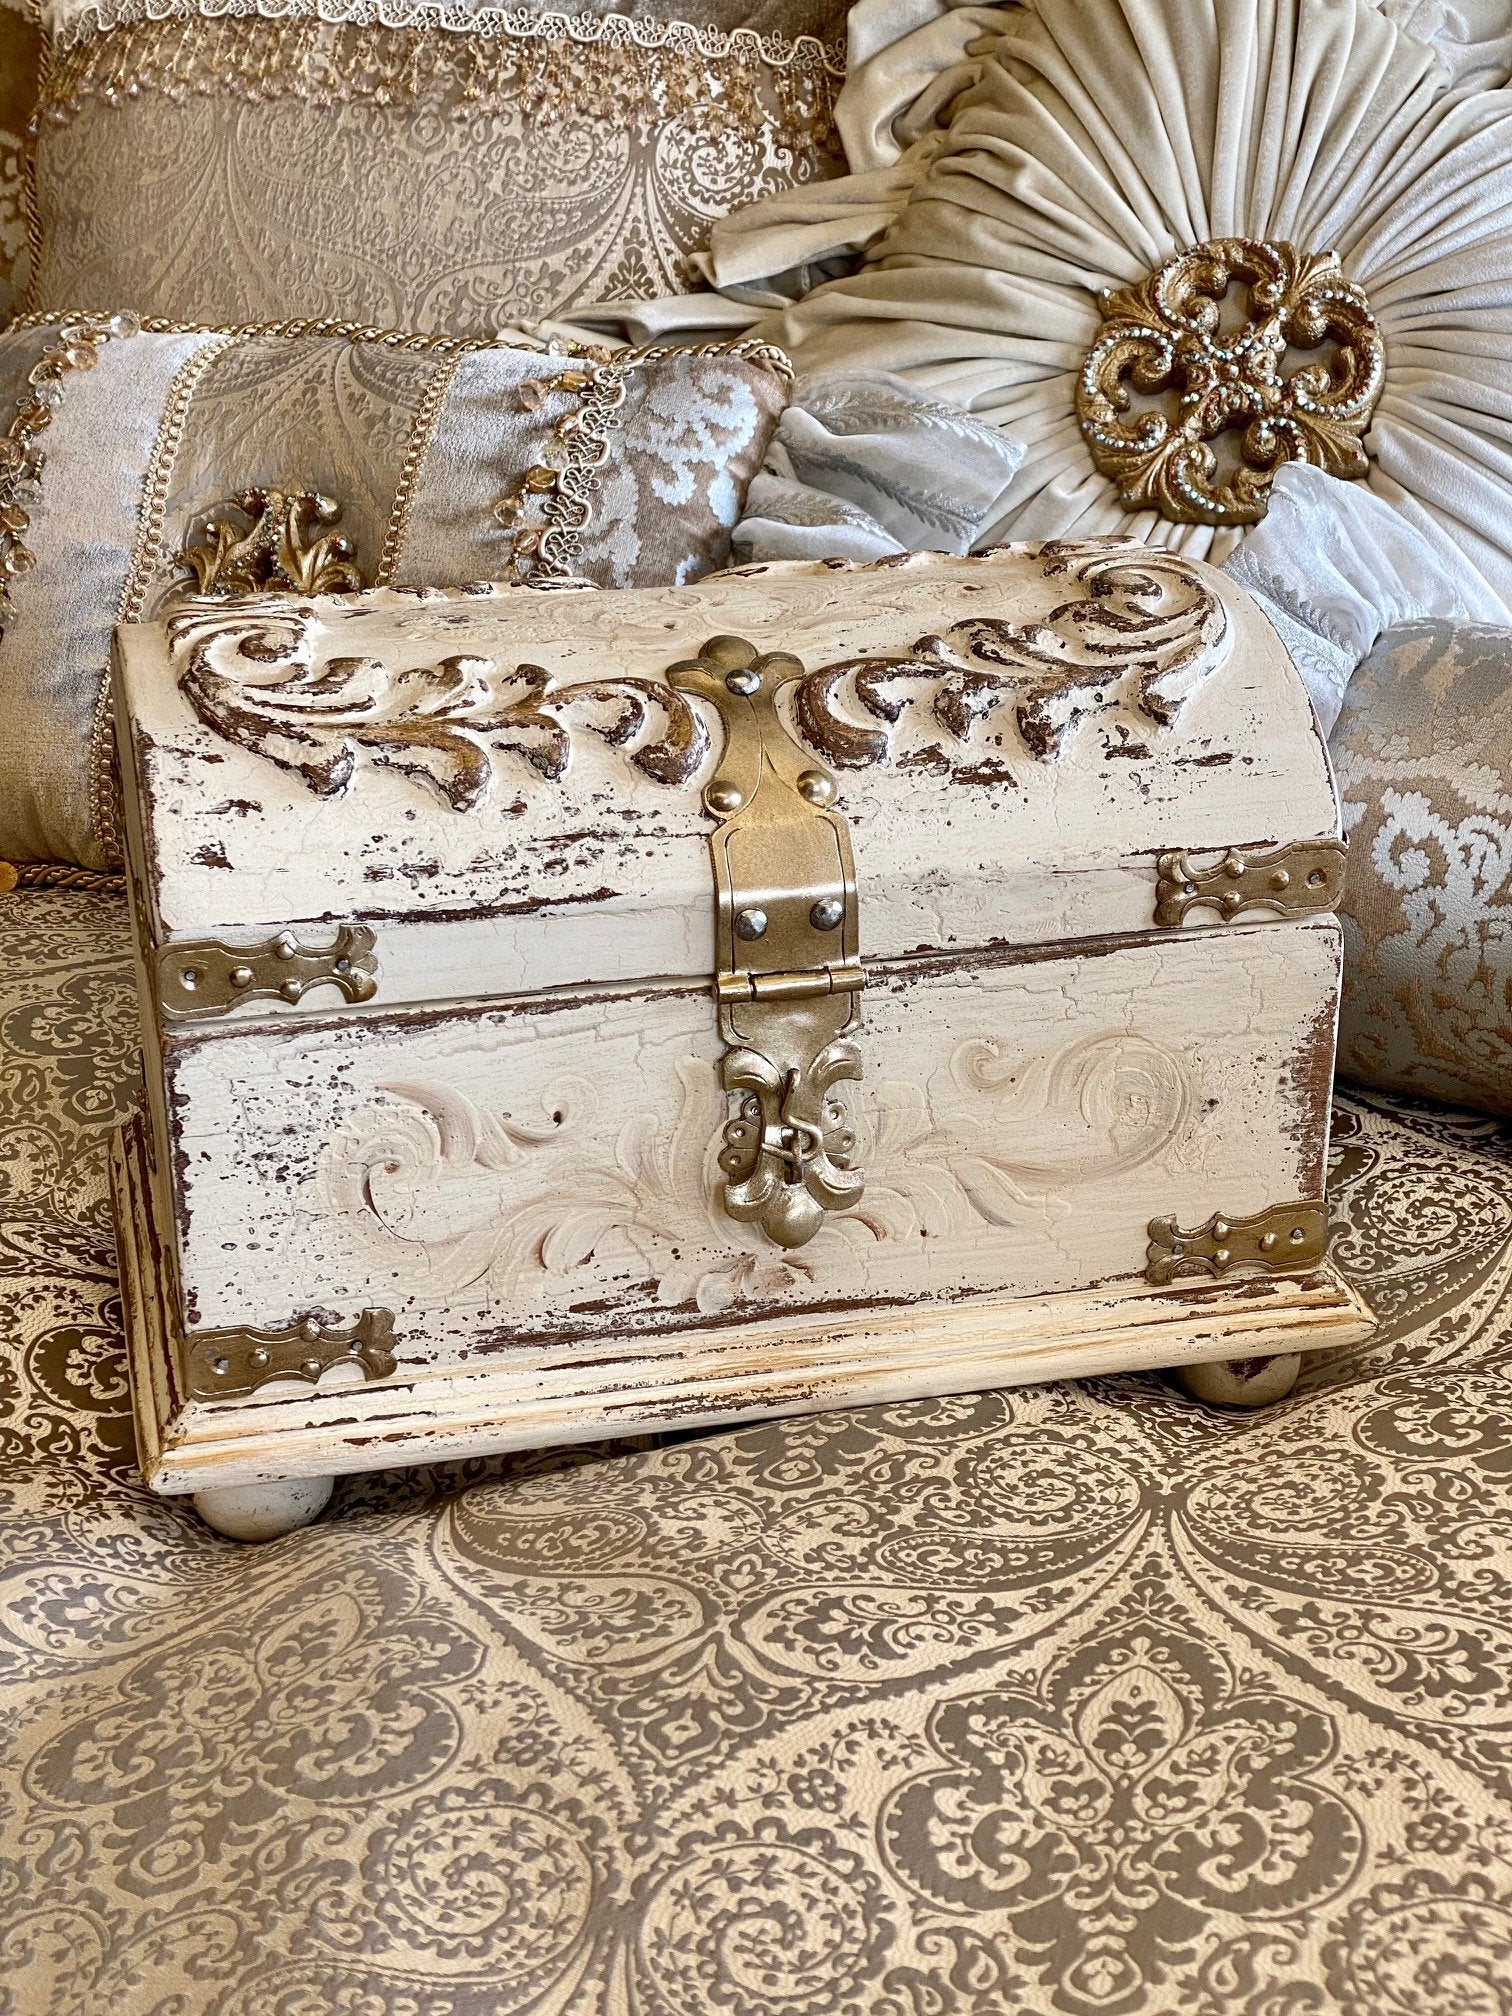 https://reilly-chanceliving.com/cdn/shop/products/Decorative_tabletop_box-hand_carved_wood_treasure_chest_box-old_world_decor-tuscan_home_decor-reilly_chance_91590fd2-399a-455d-ba1b-2edbfefbfed4.jpg?v=1628464812